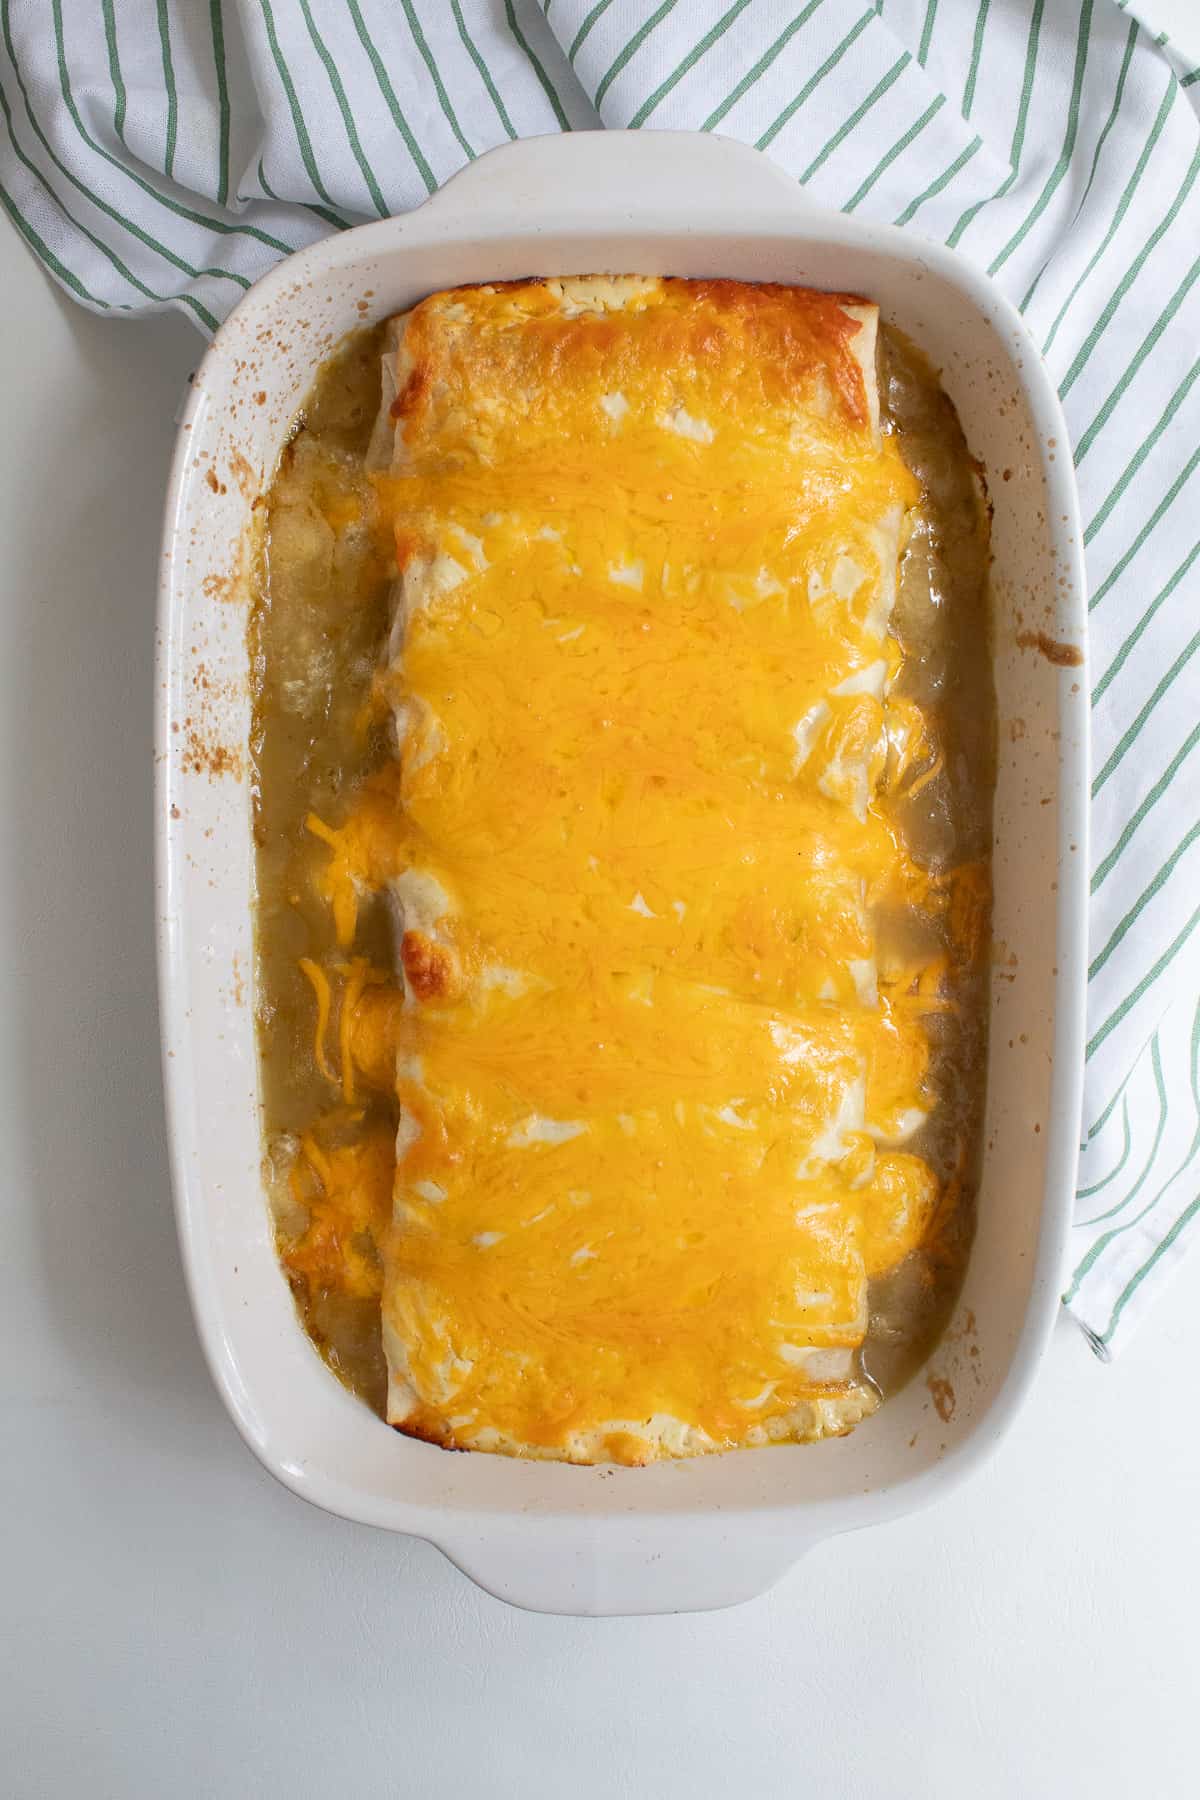 The baked casserole with melted cheese over the burritos sits on a white surface.